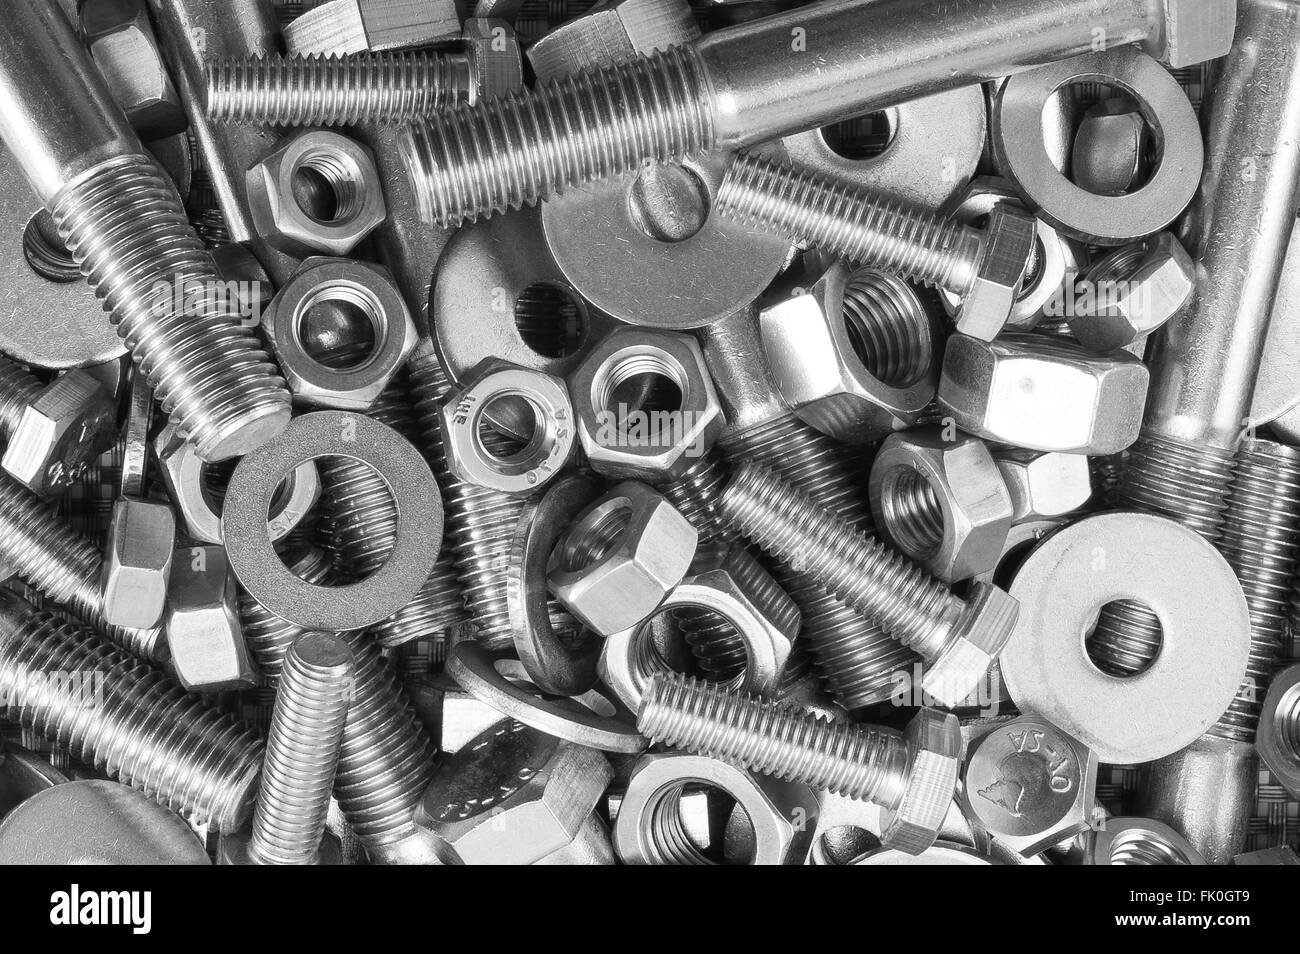 A mixture of stainless steel nuts bolts and washers Stock Photo